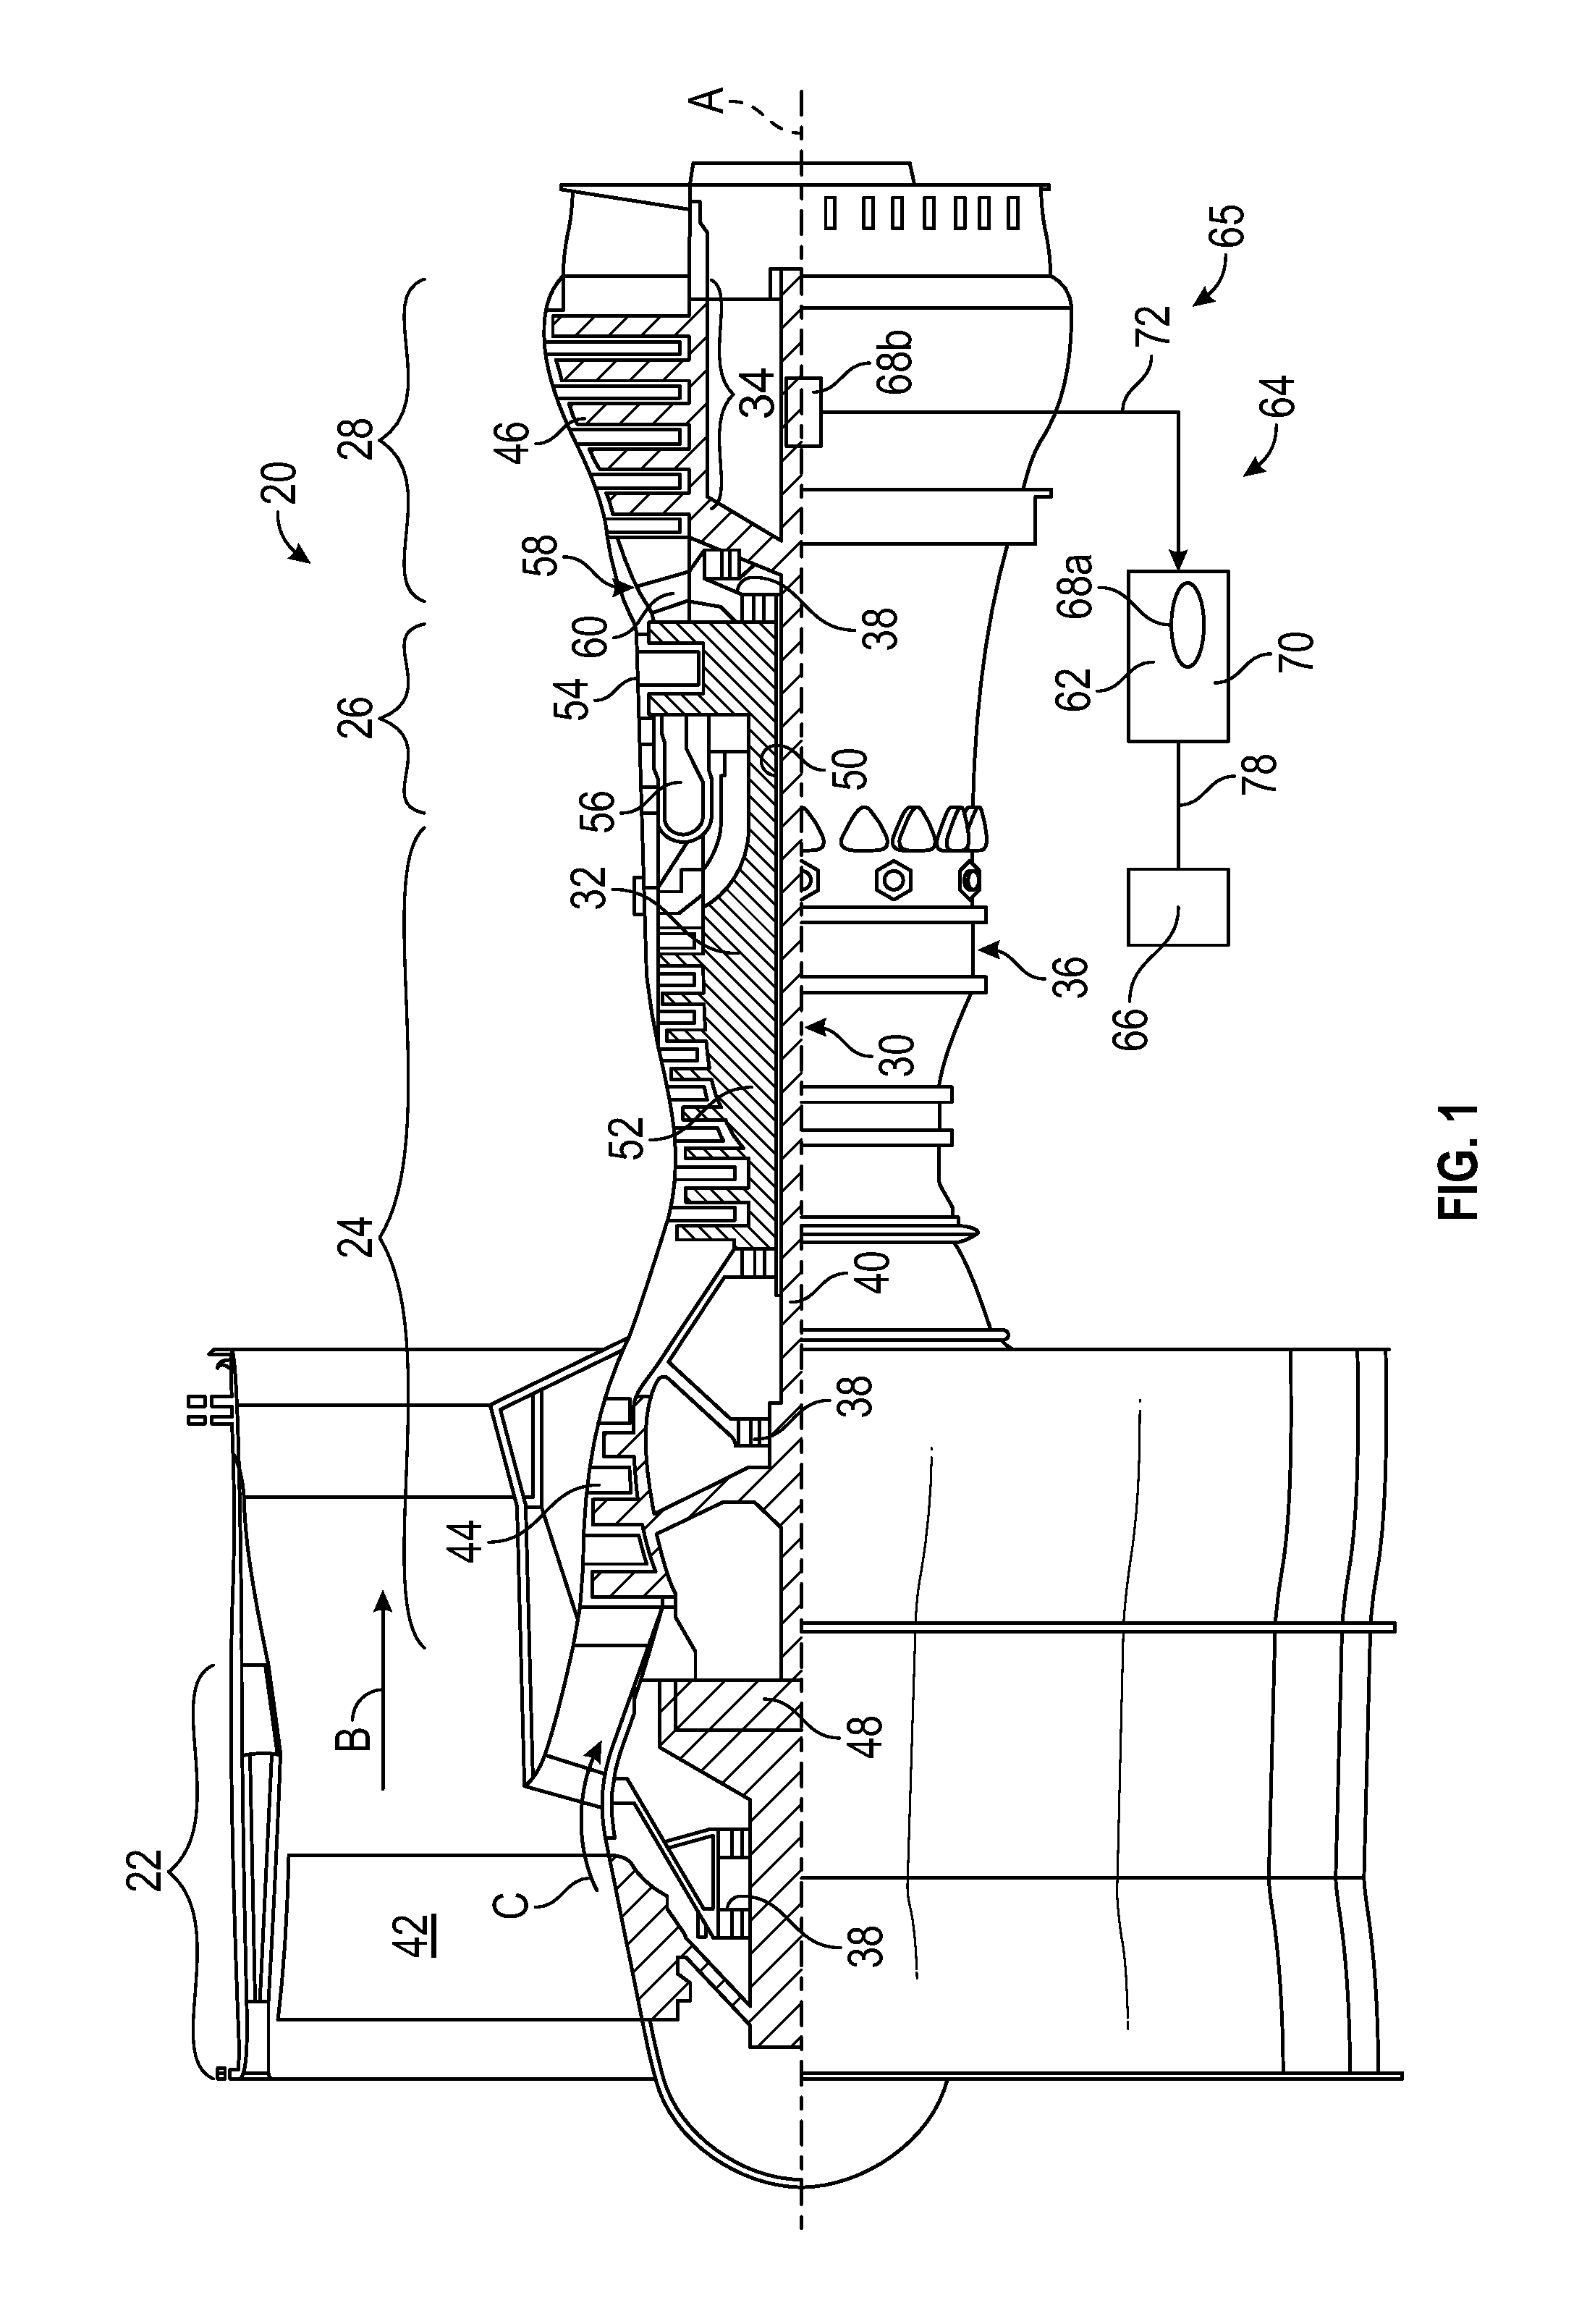 Electromagnetic sensing of components in electromagnetic communication and method